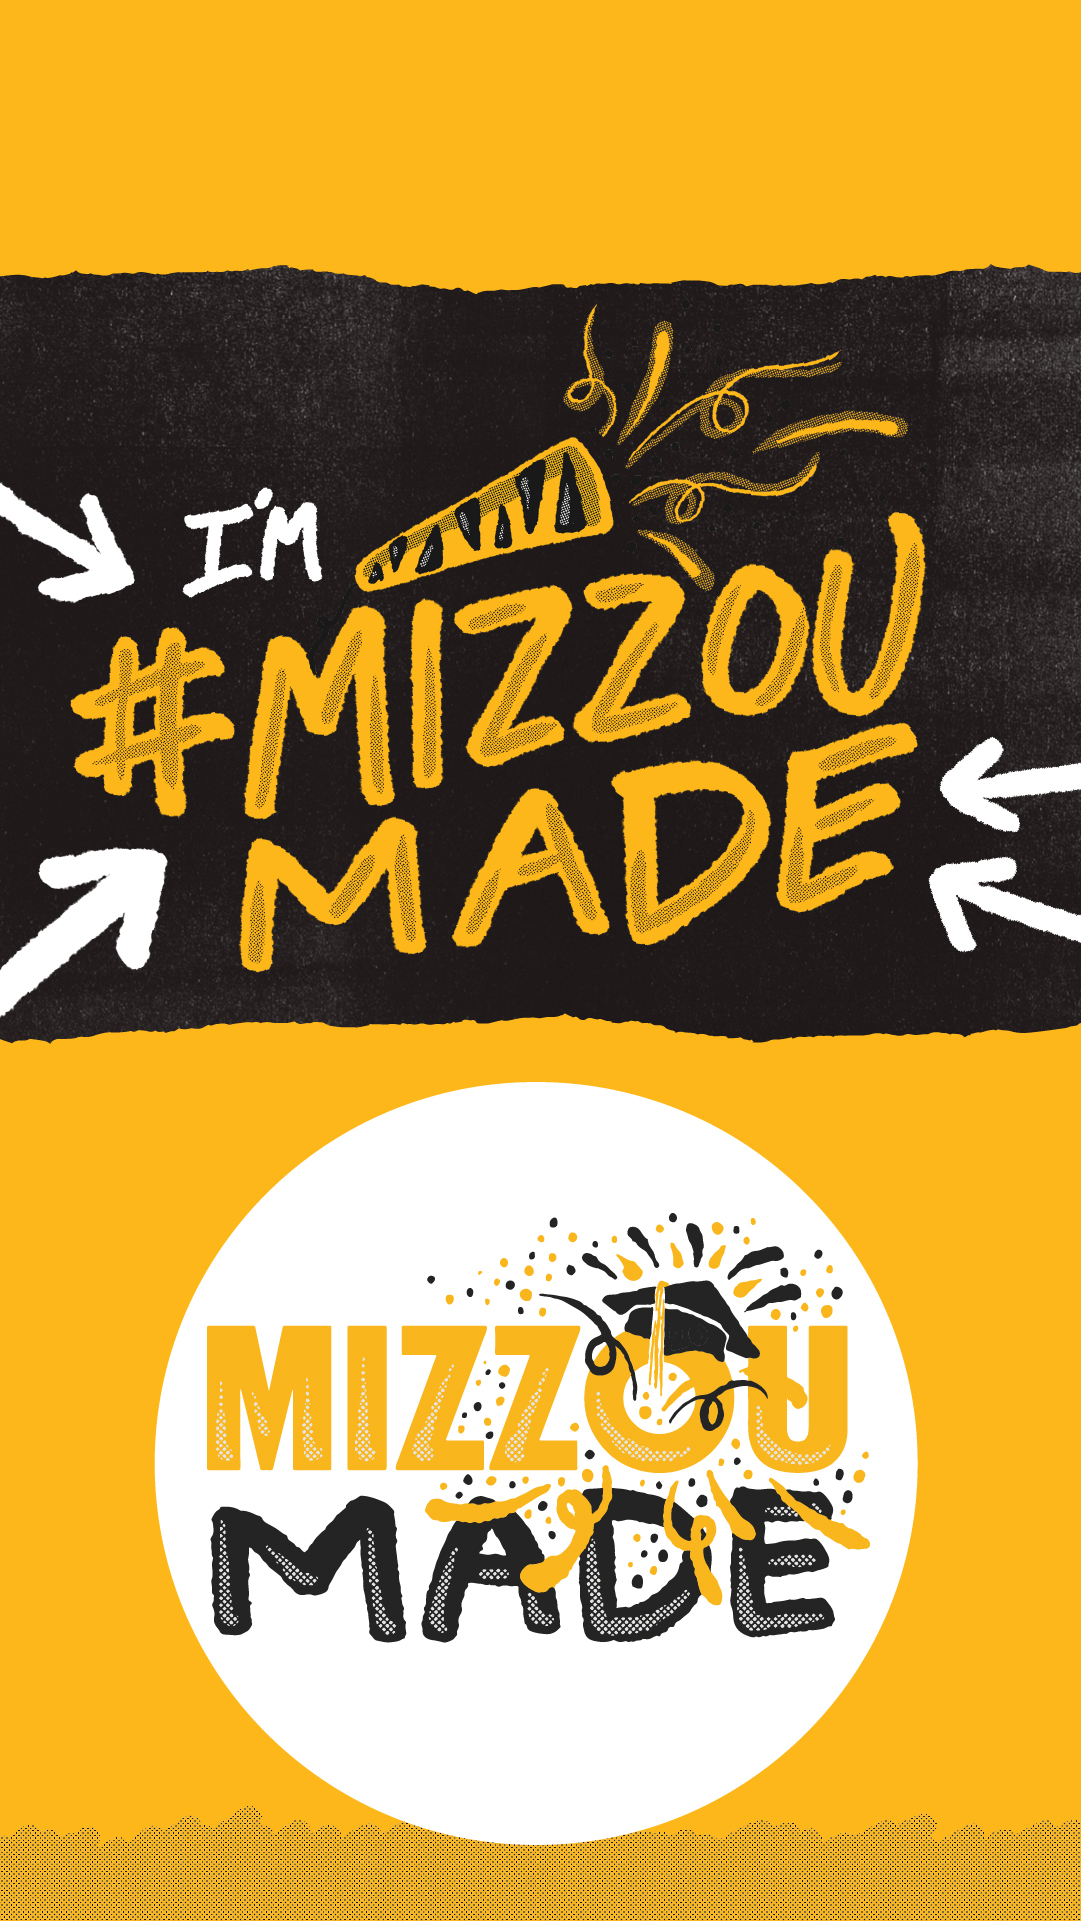 The top looks like a ripped gold page. Underneath is a black background with a hand drawn “I’m #Mizzou Made” with arrows pointing to the text and a drawing of a party popper with streamers coming out. The bottom looks like a ripped gold page with a half tone dotted pattern covering half of it.. The bottom looks like a ripped gold page with a half tone dotted pattern covering the bottom third of it. There is a white circle in the center of the gold. Inside the circle is a hand drawn gold bubble “Mizzou” and black “Made” stacked underneath it. The 'o' in the Mizzou has a graduation cap with confetti shooting out.